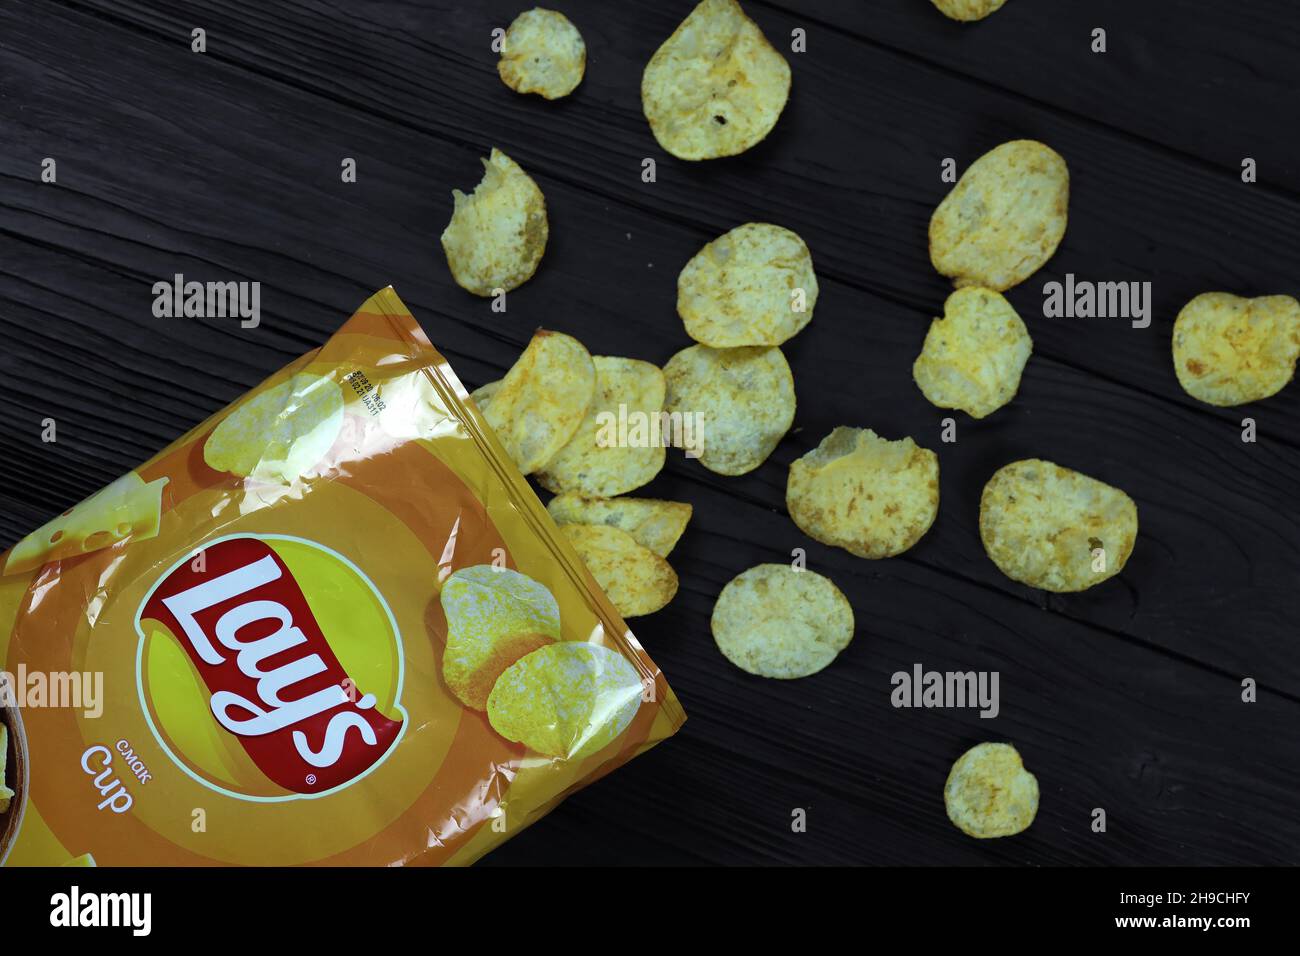 KHARKOV, UKRAINE - JANUARY 3, 2021: Lays potato chips with cheese flavour and original lays logo in middle of package. Worldwide famous brand of potat Stock Photo